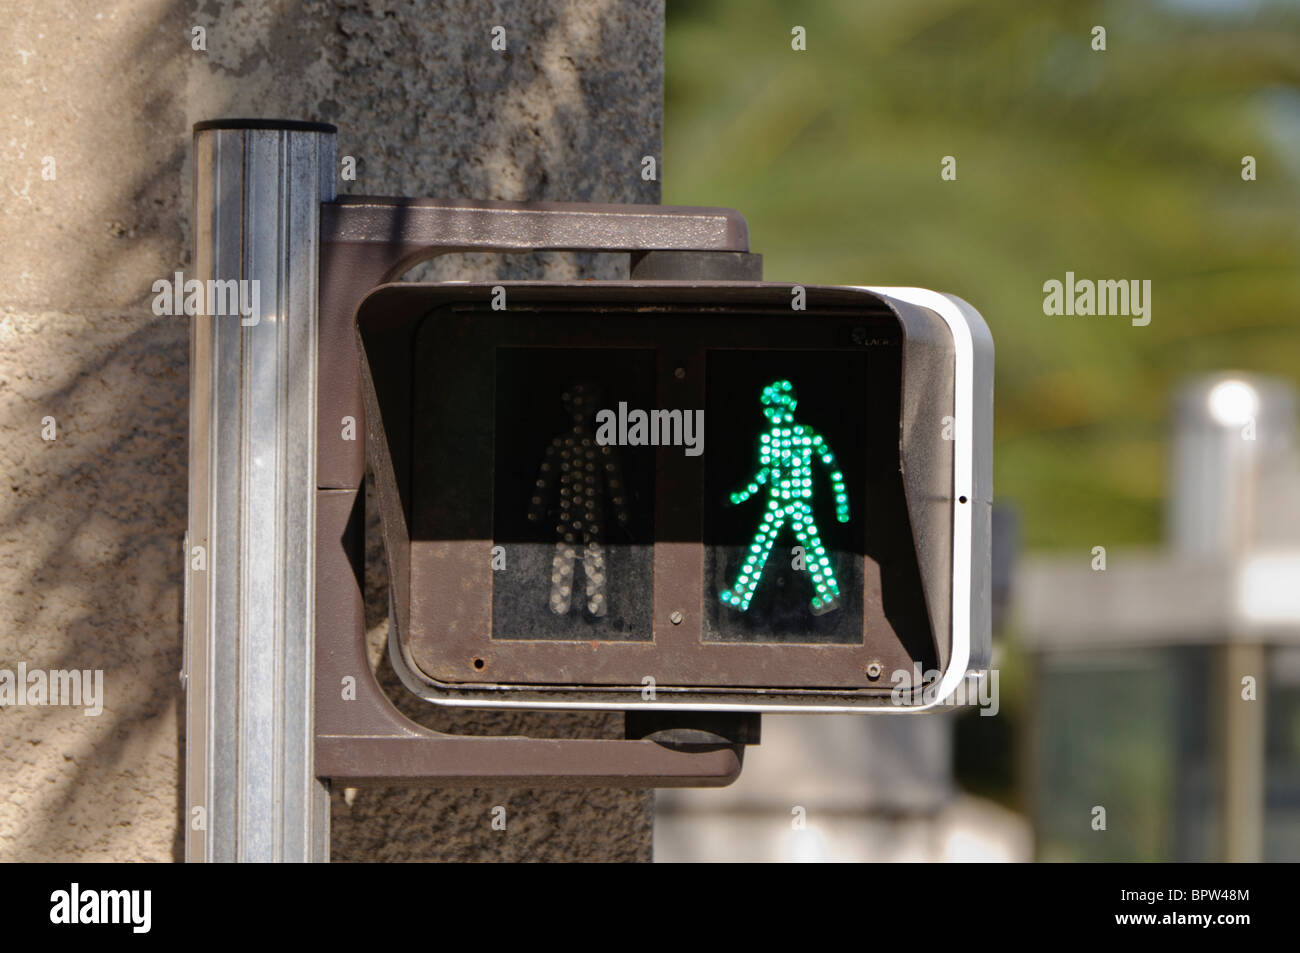 Green-man at a French pedestrian crossing Stock Photo